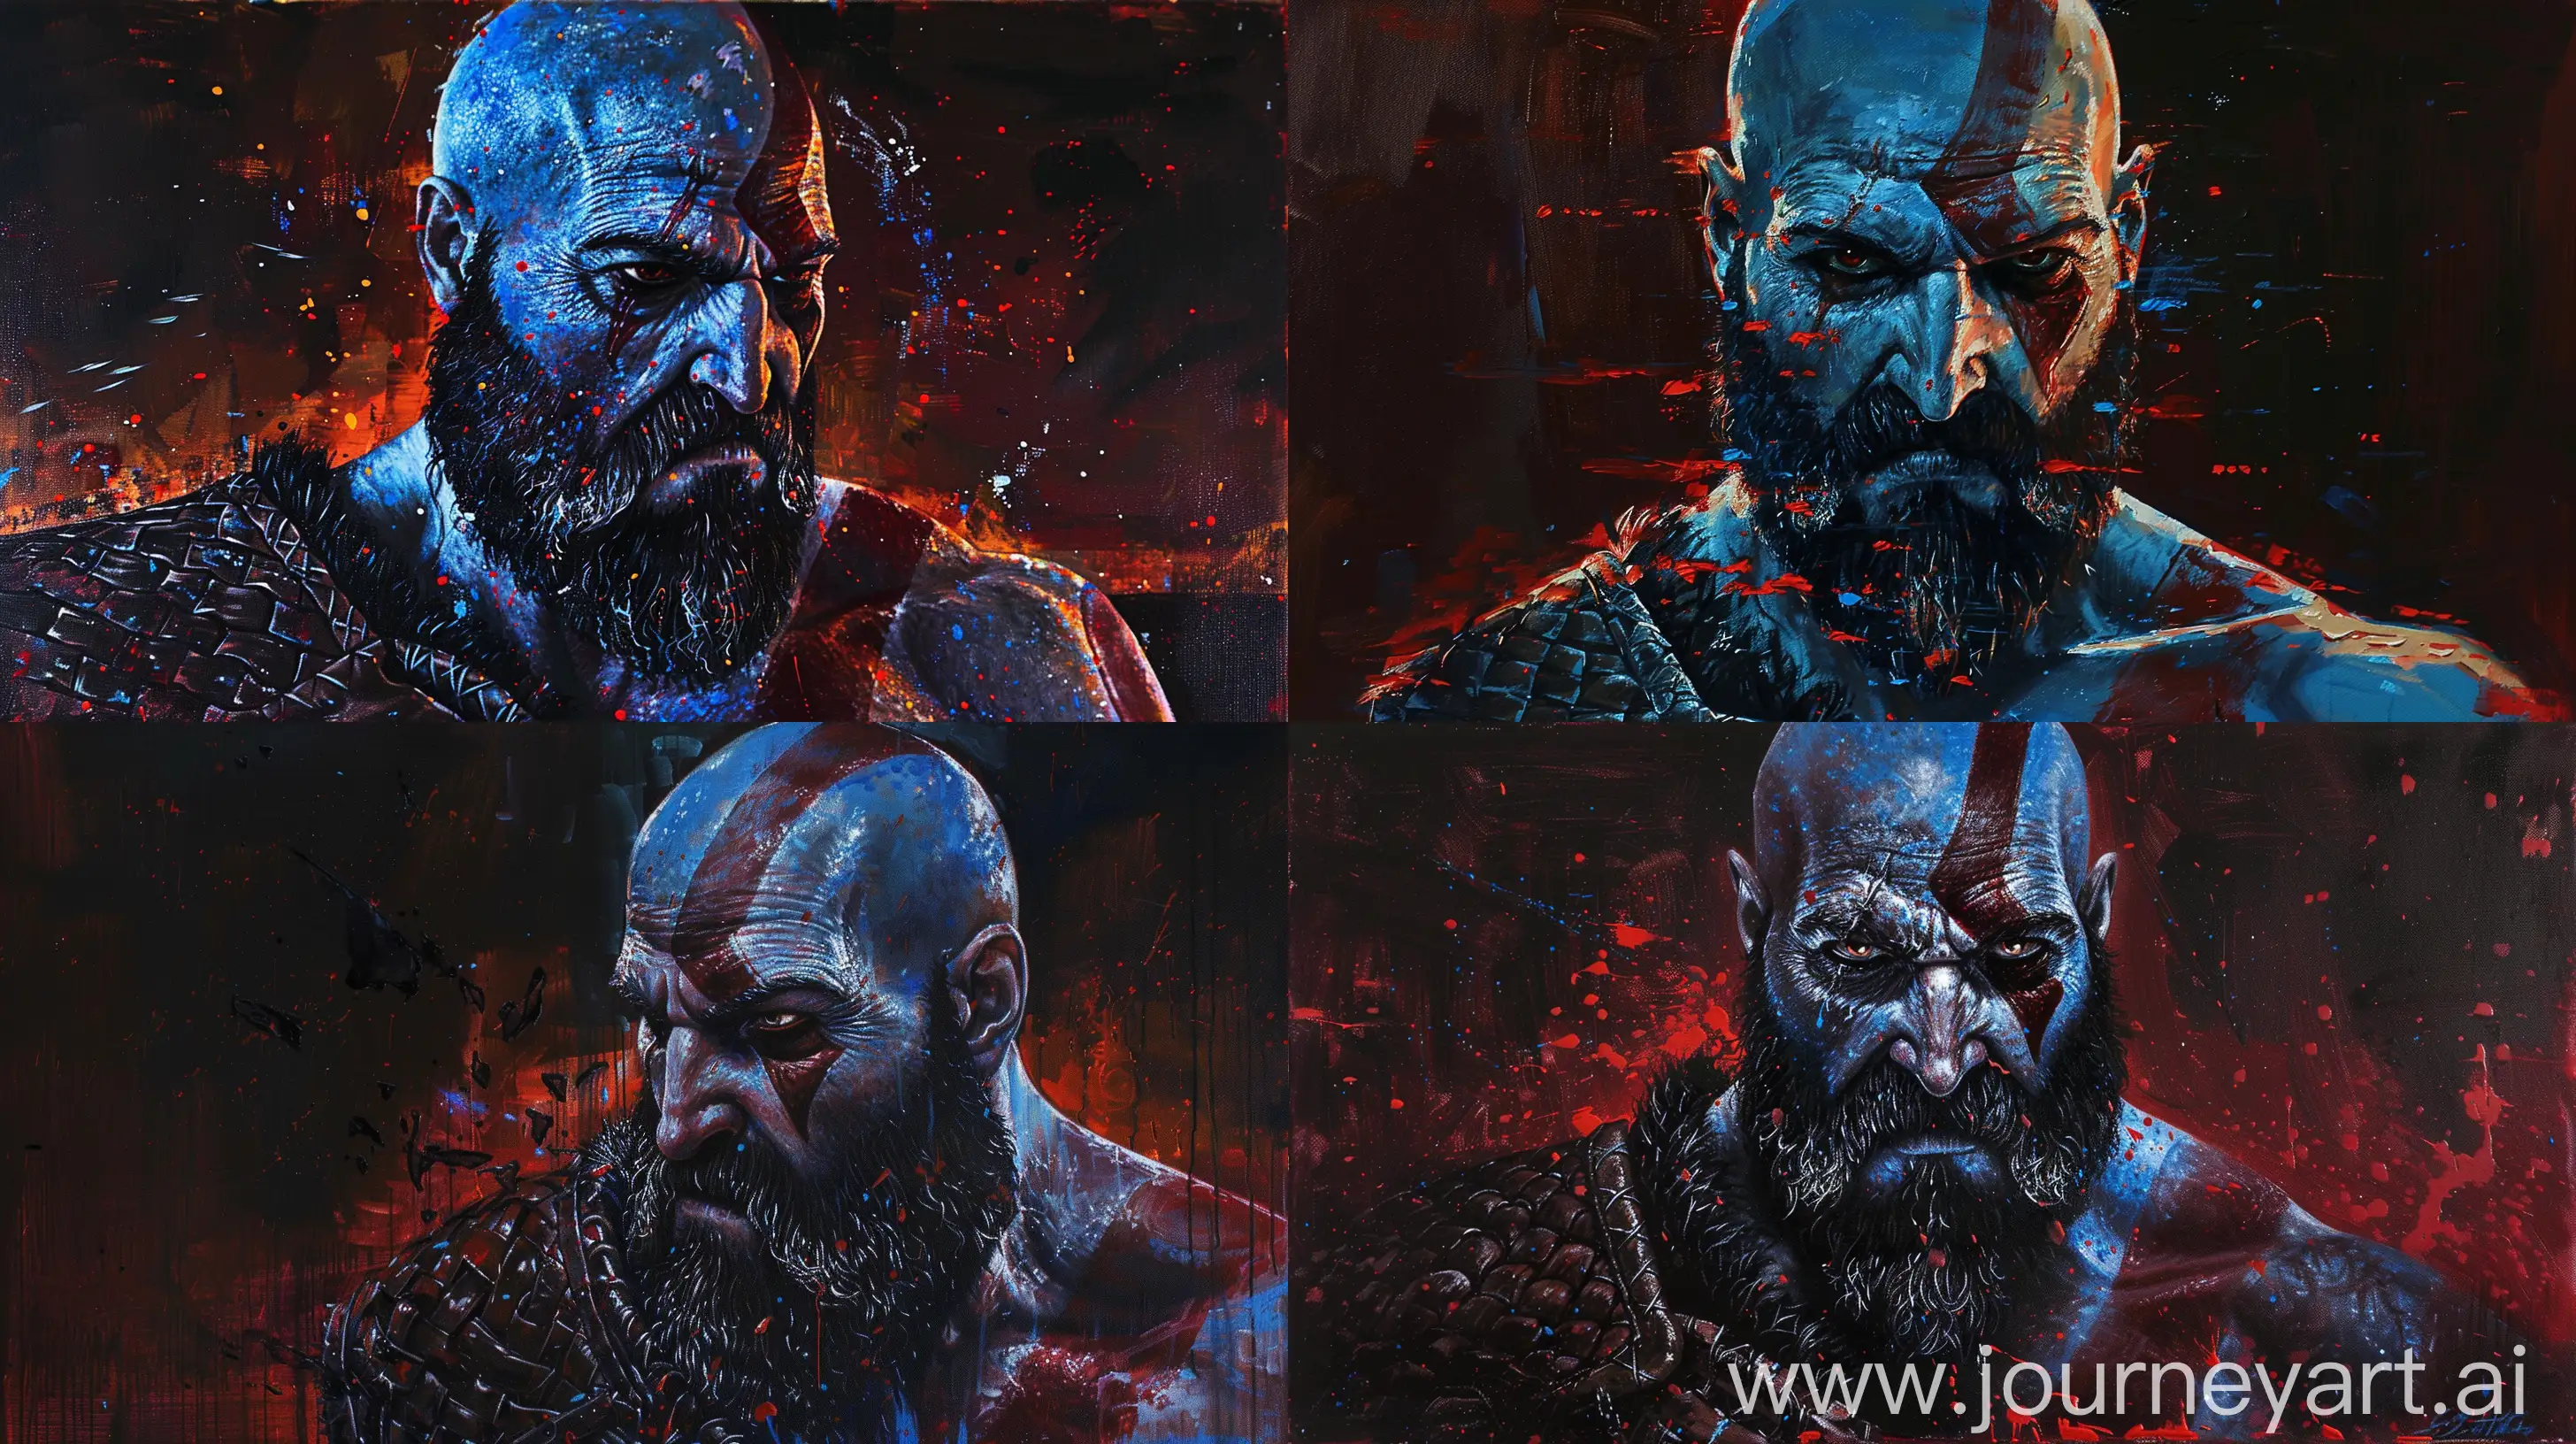 Epic-Kratos-Portrait-in-Star-Wars-Theme-Dark-and-Dramatic-Oil-Painting